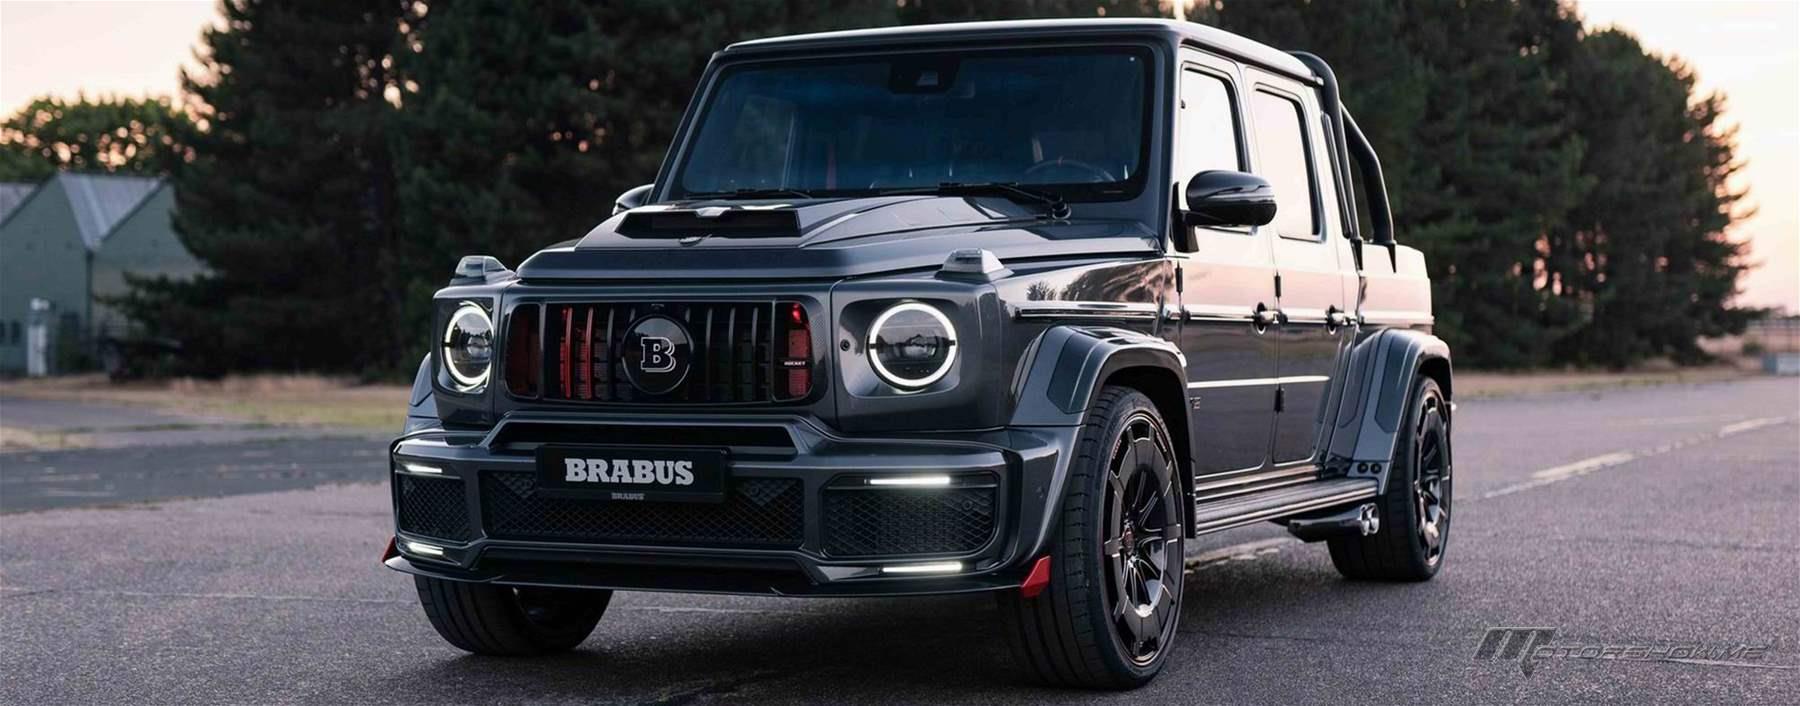 Introducing the BRABUS P 900 ROCKET EDITION “One of Ten”